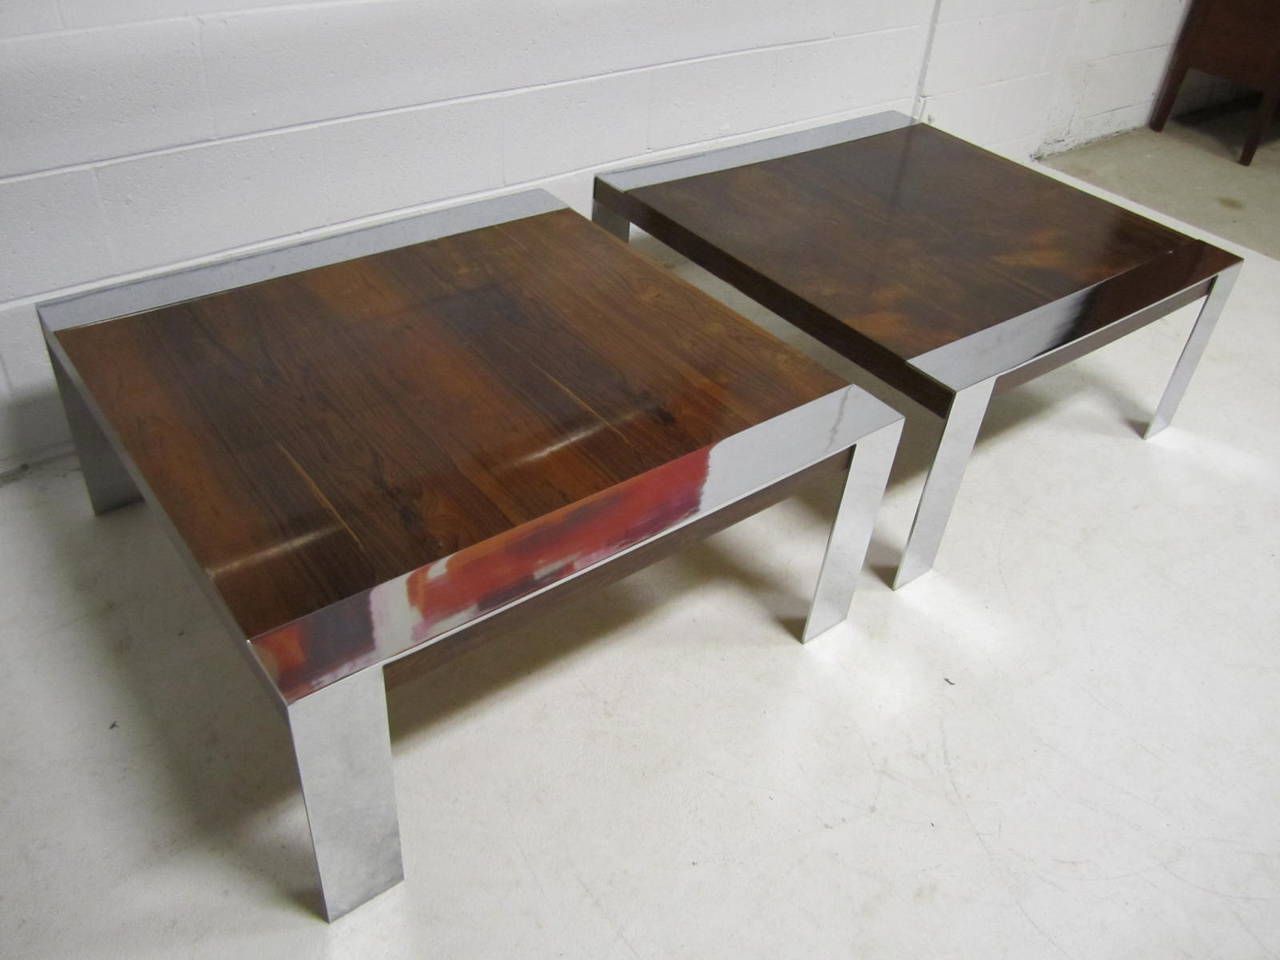 Stunning Pair of Milo Baughman Style Rosewood and Chrome Coffee Tables For Sale 4